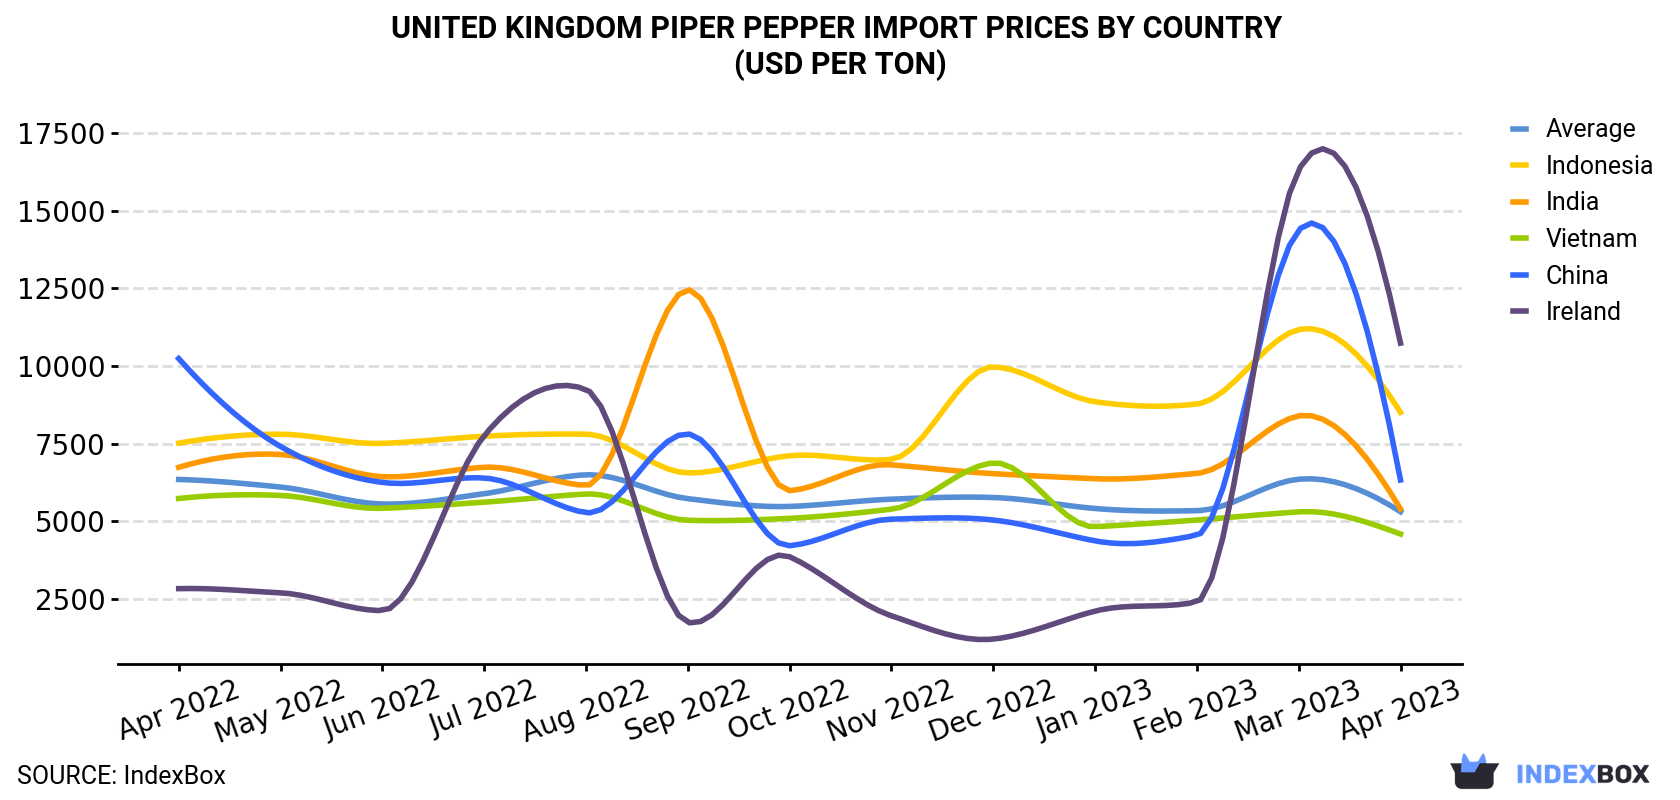 United Kingdom Piper Pepper Import Prices By Country (USD Per Ton)